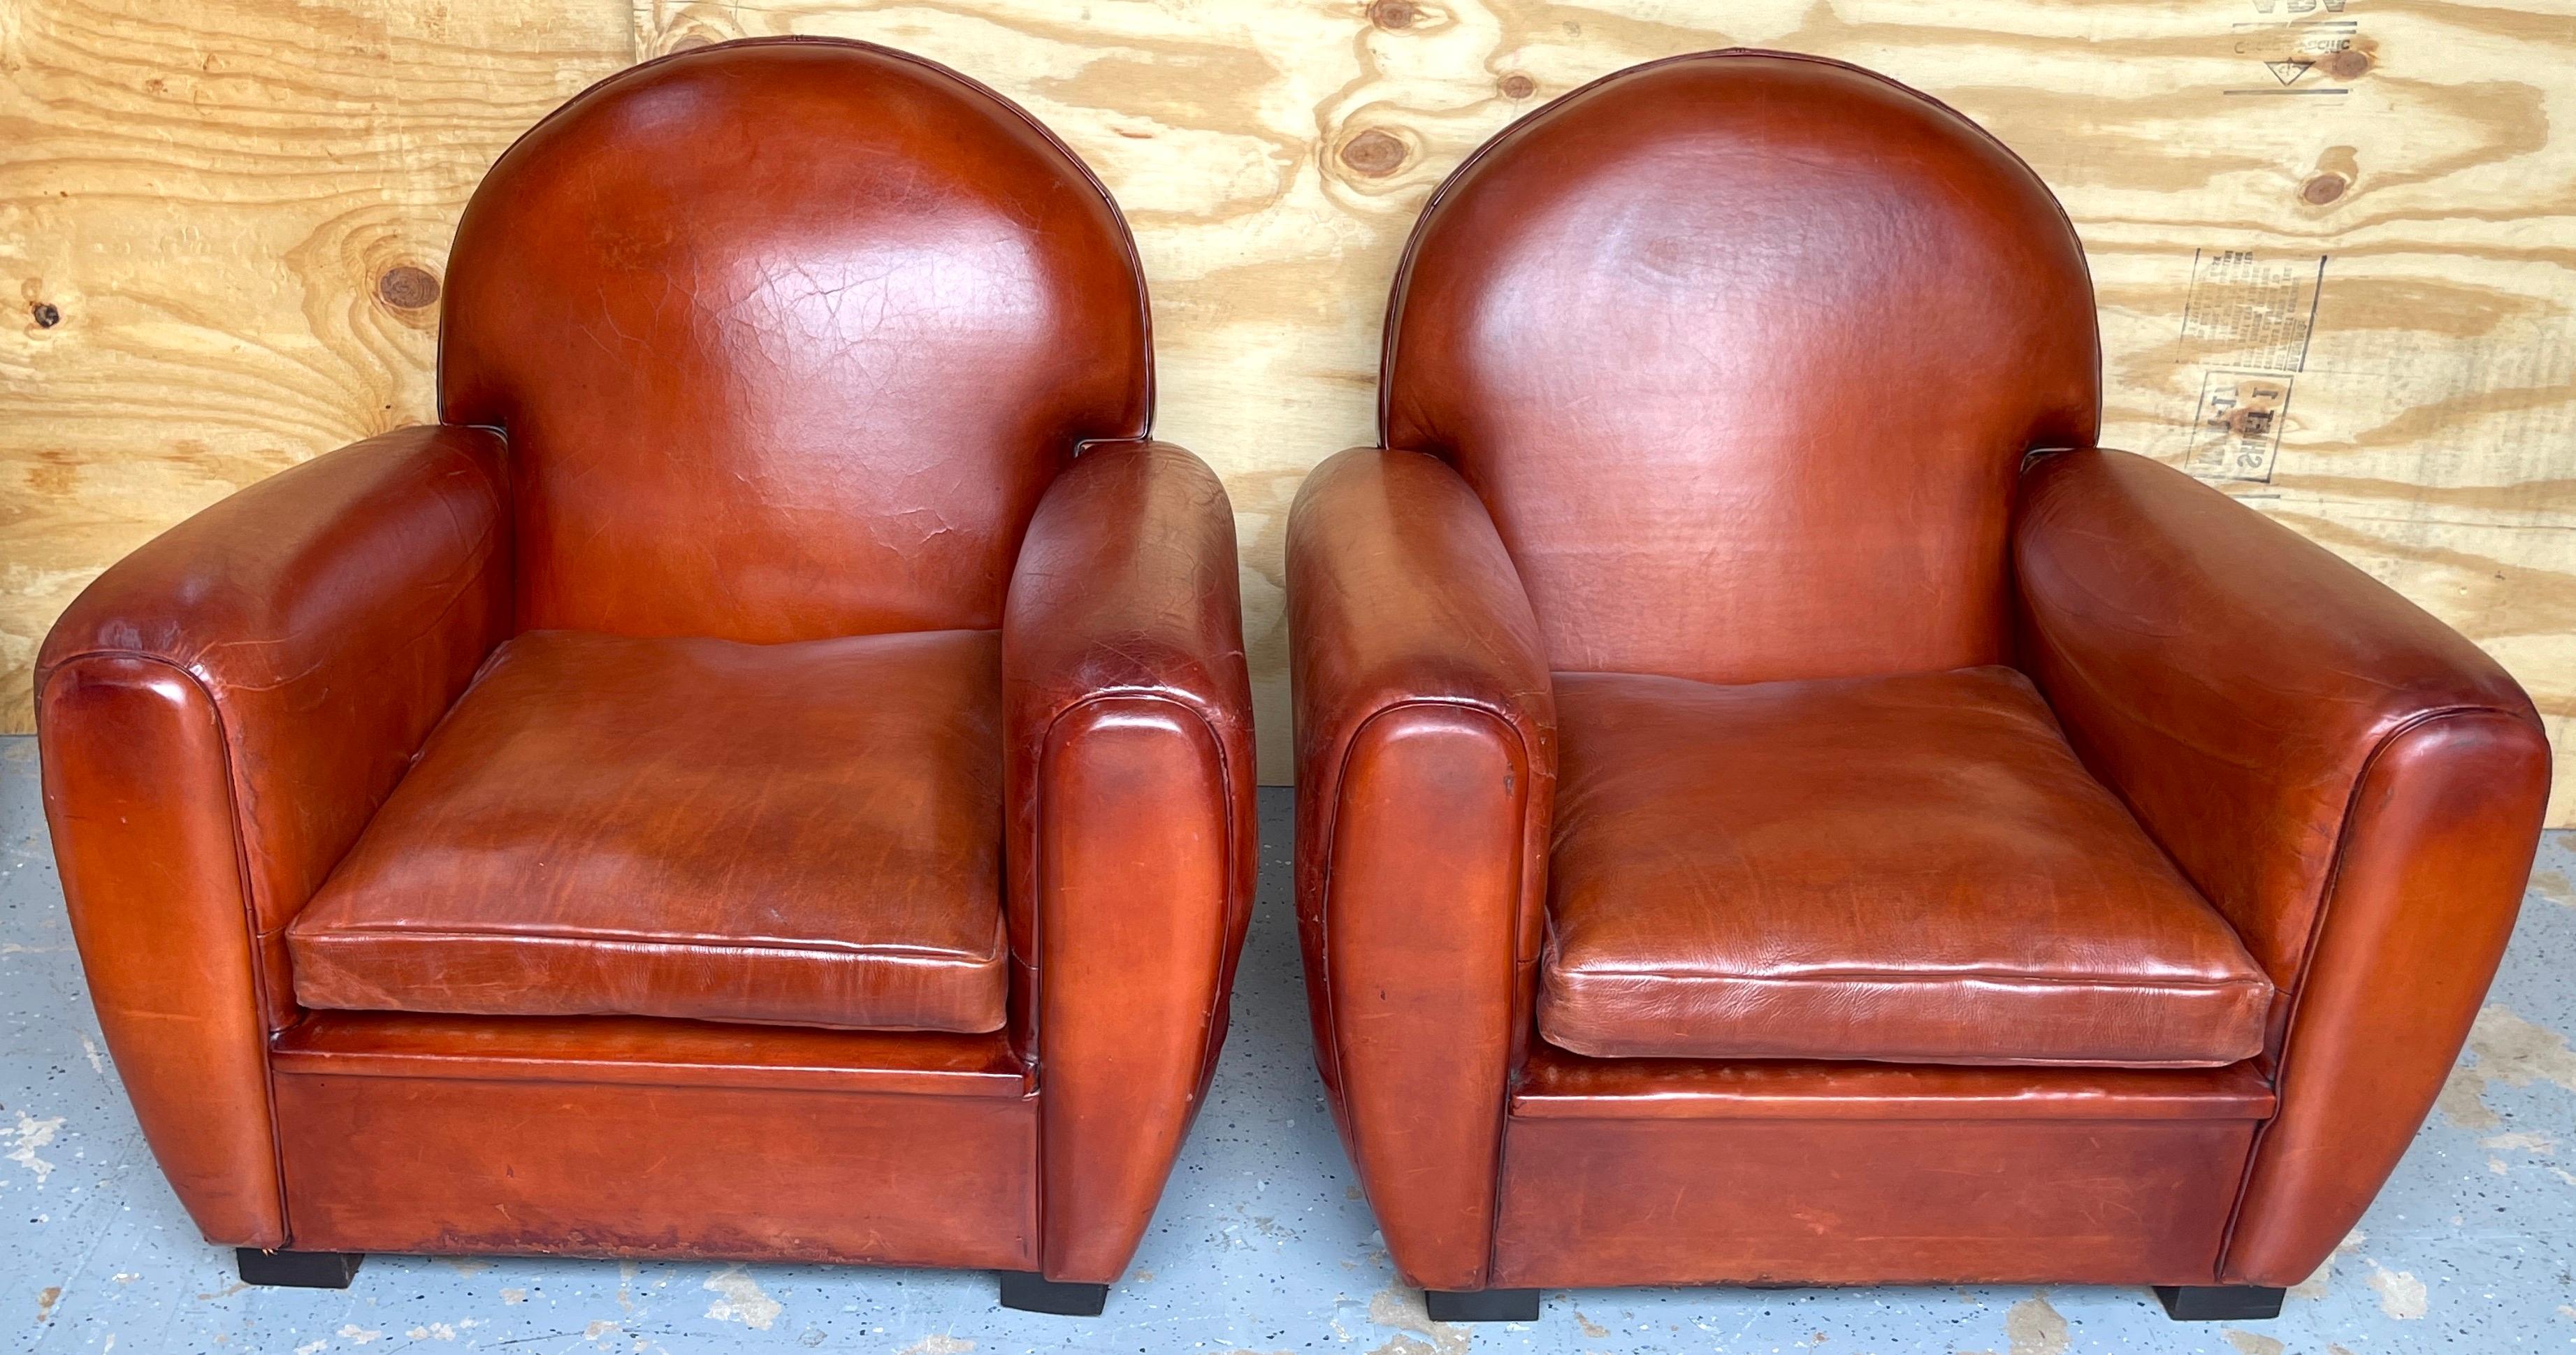 Pair of French Art Deco saddle leather chairs
France, 20th century
Each sumptuous club chair upholstered thick saddle colored leather, with random signs of use and patina, structurally sound. Raised on four ebonized wood square block feet. Ready to